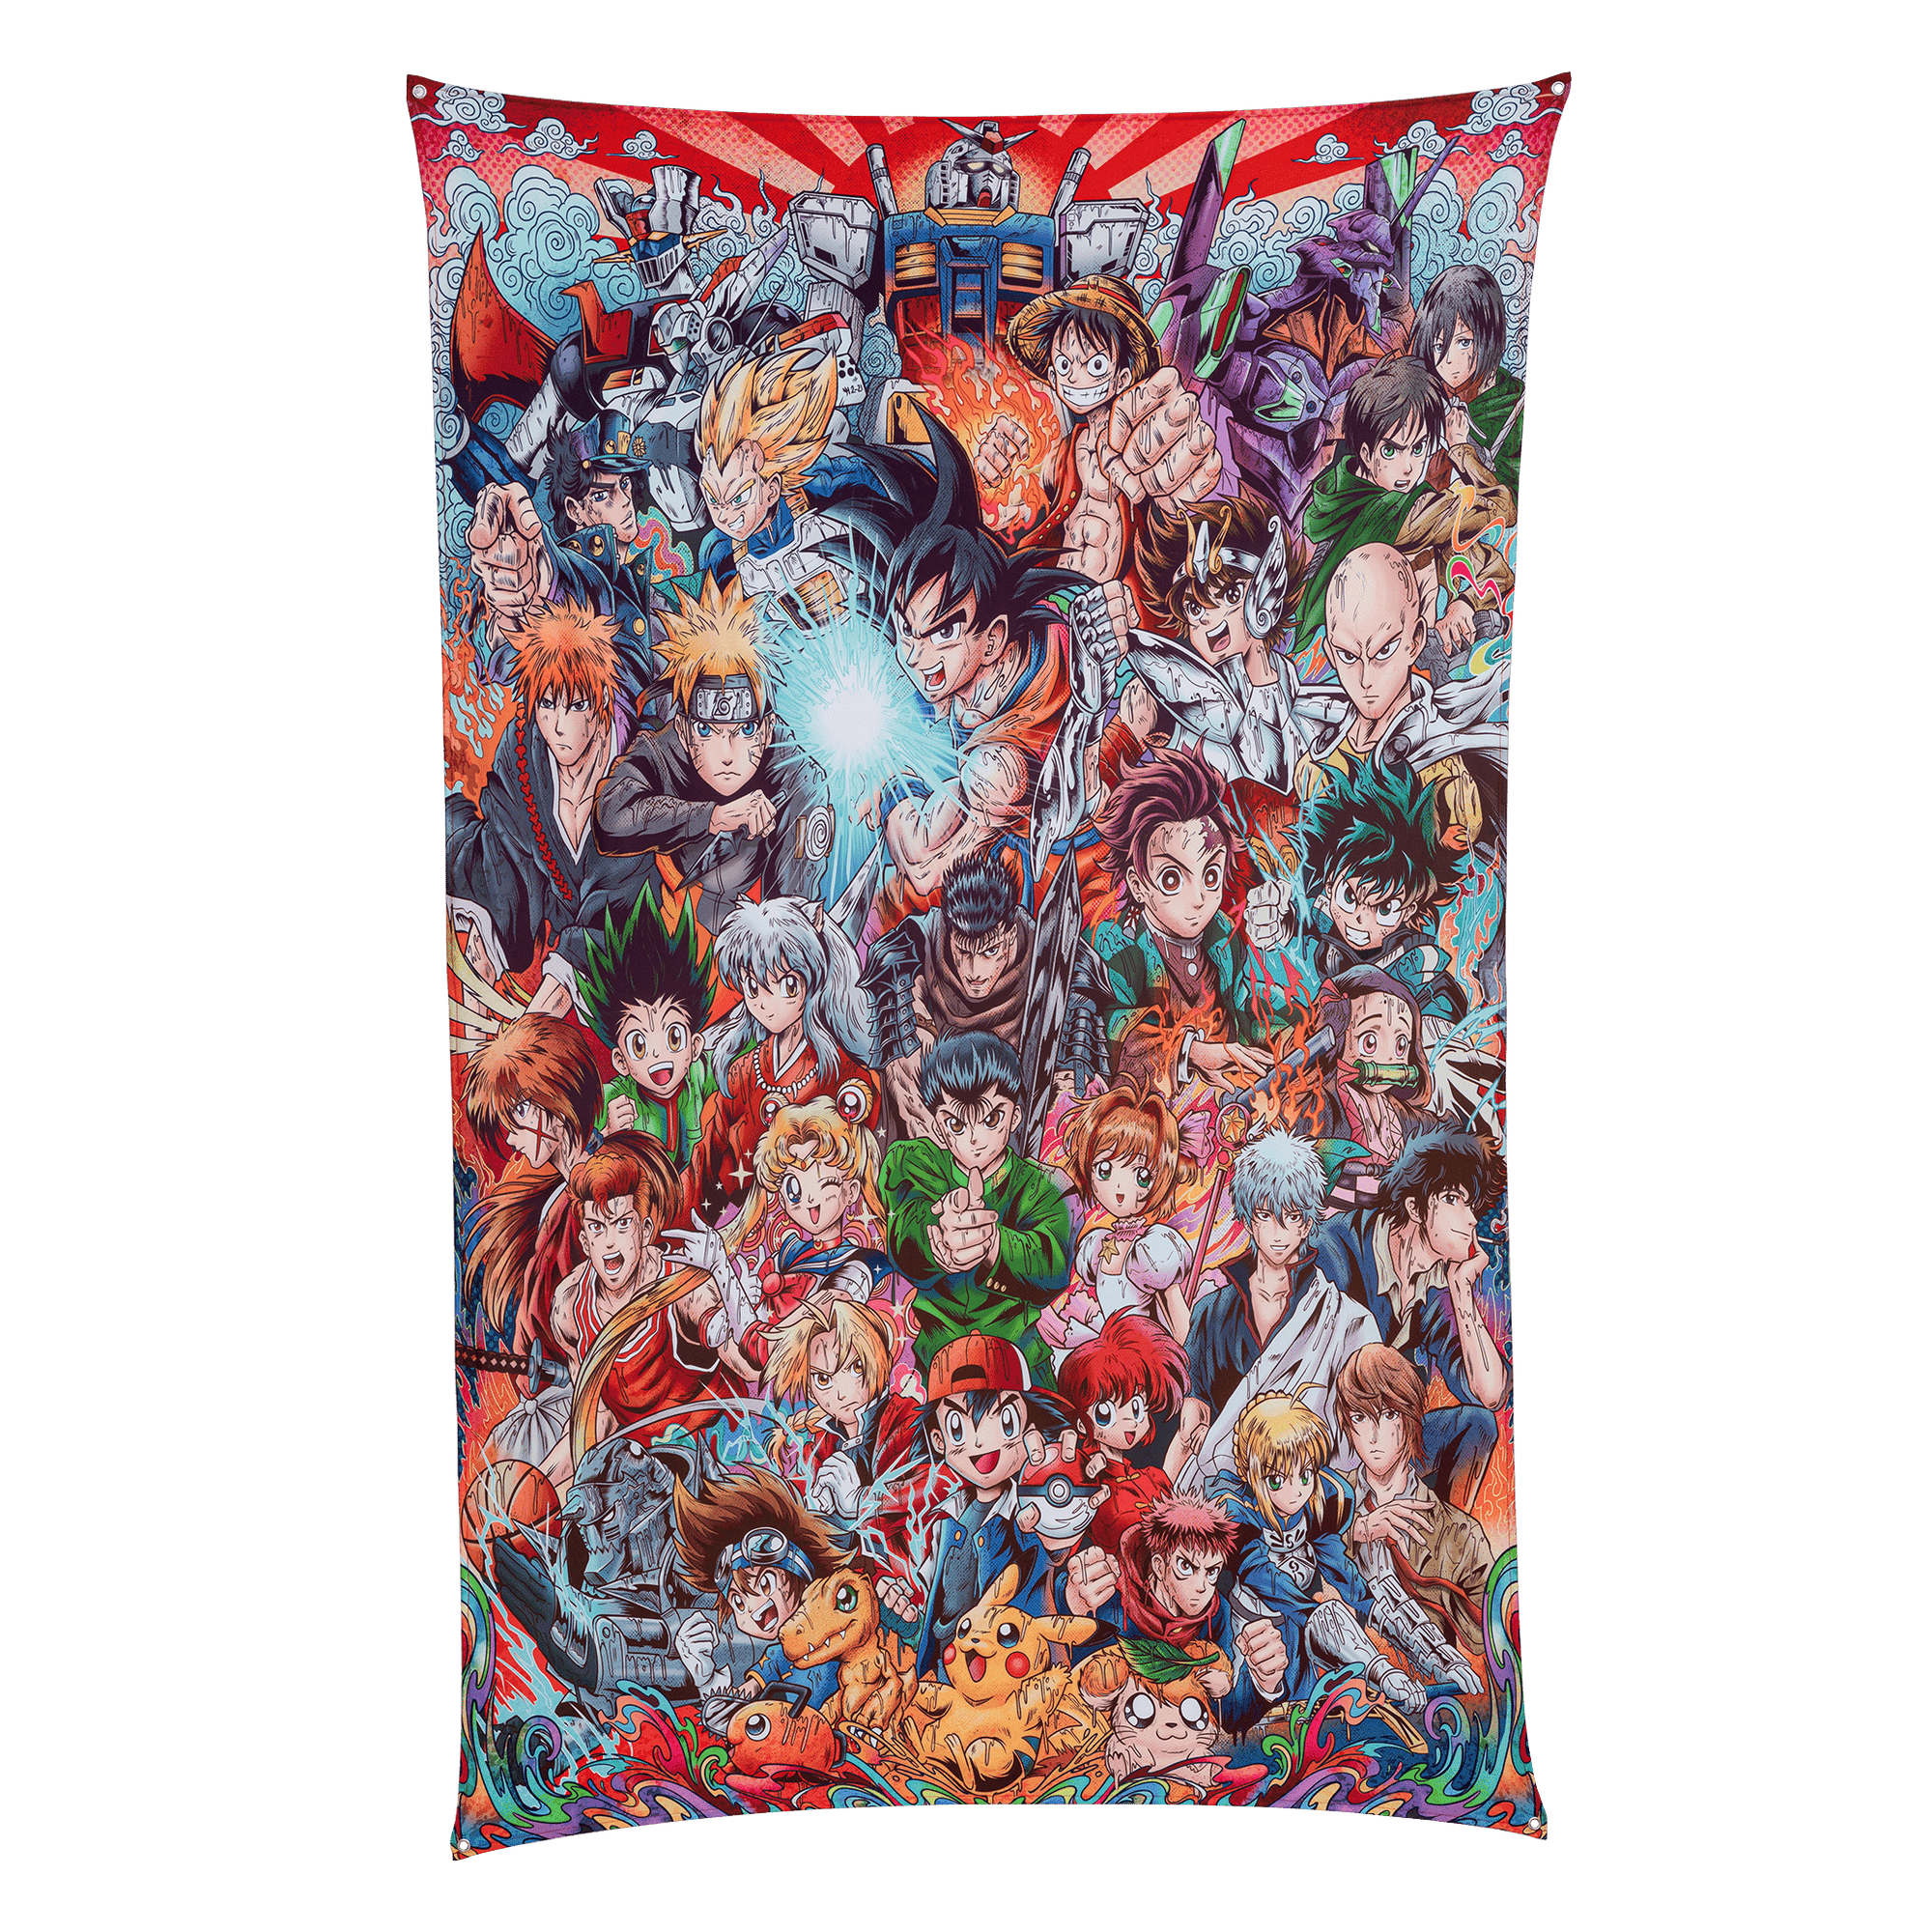 THE SICKEST ANIME TAPESTRY OF ALL TIME!